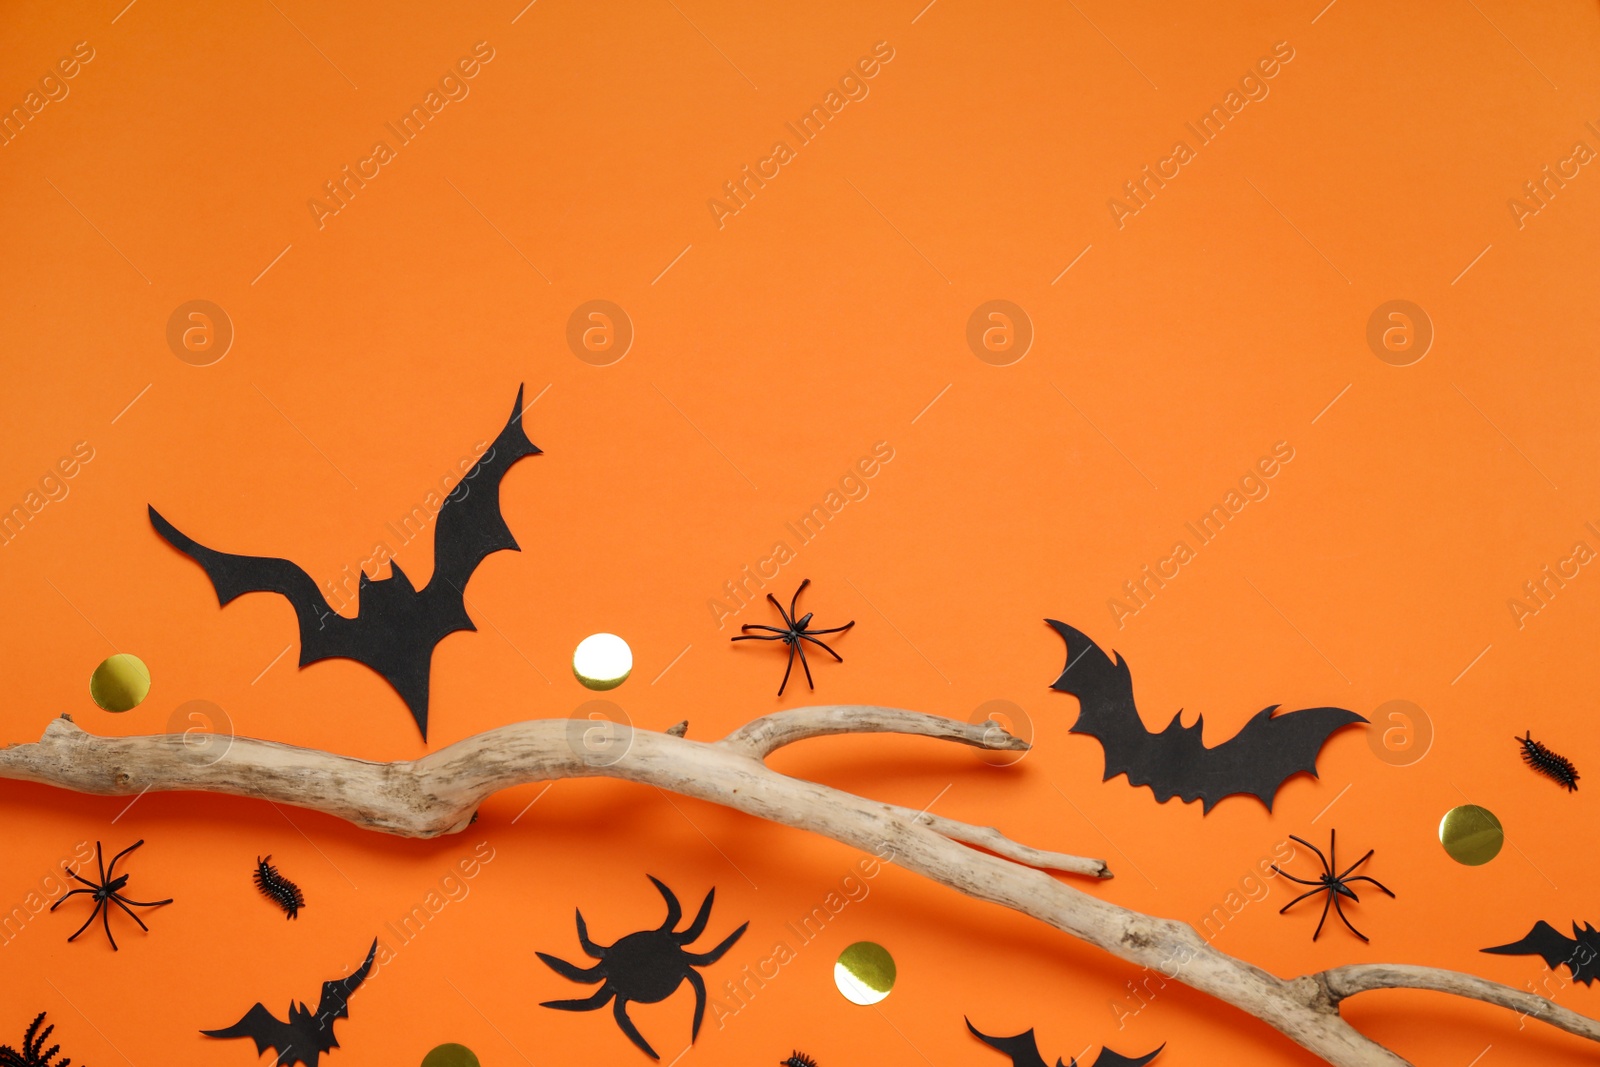 Photo of Flat lay composition with paper bats, spiders and wooden branch on orange background, space for text. Halloween decor